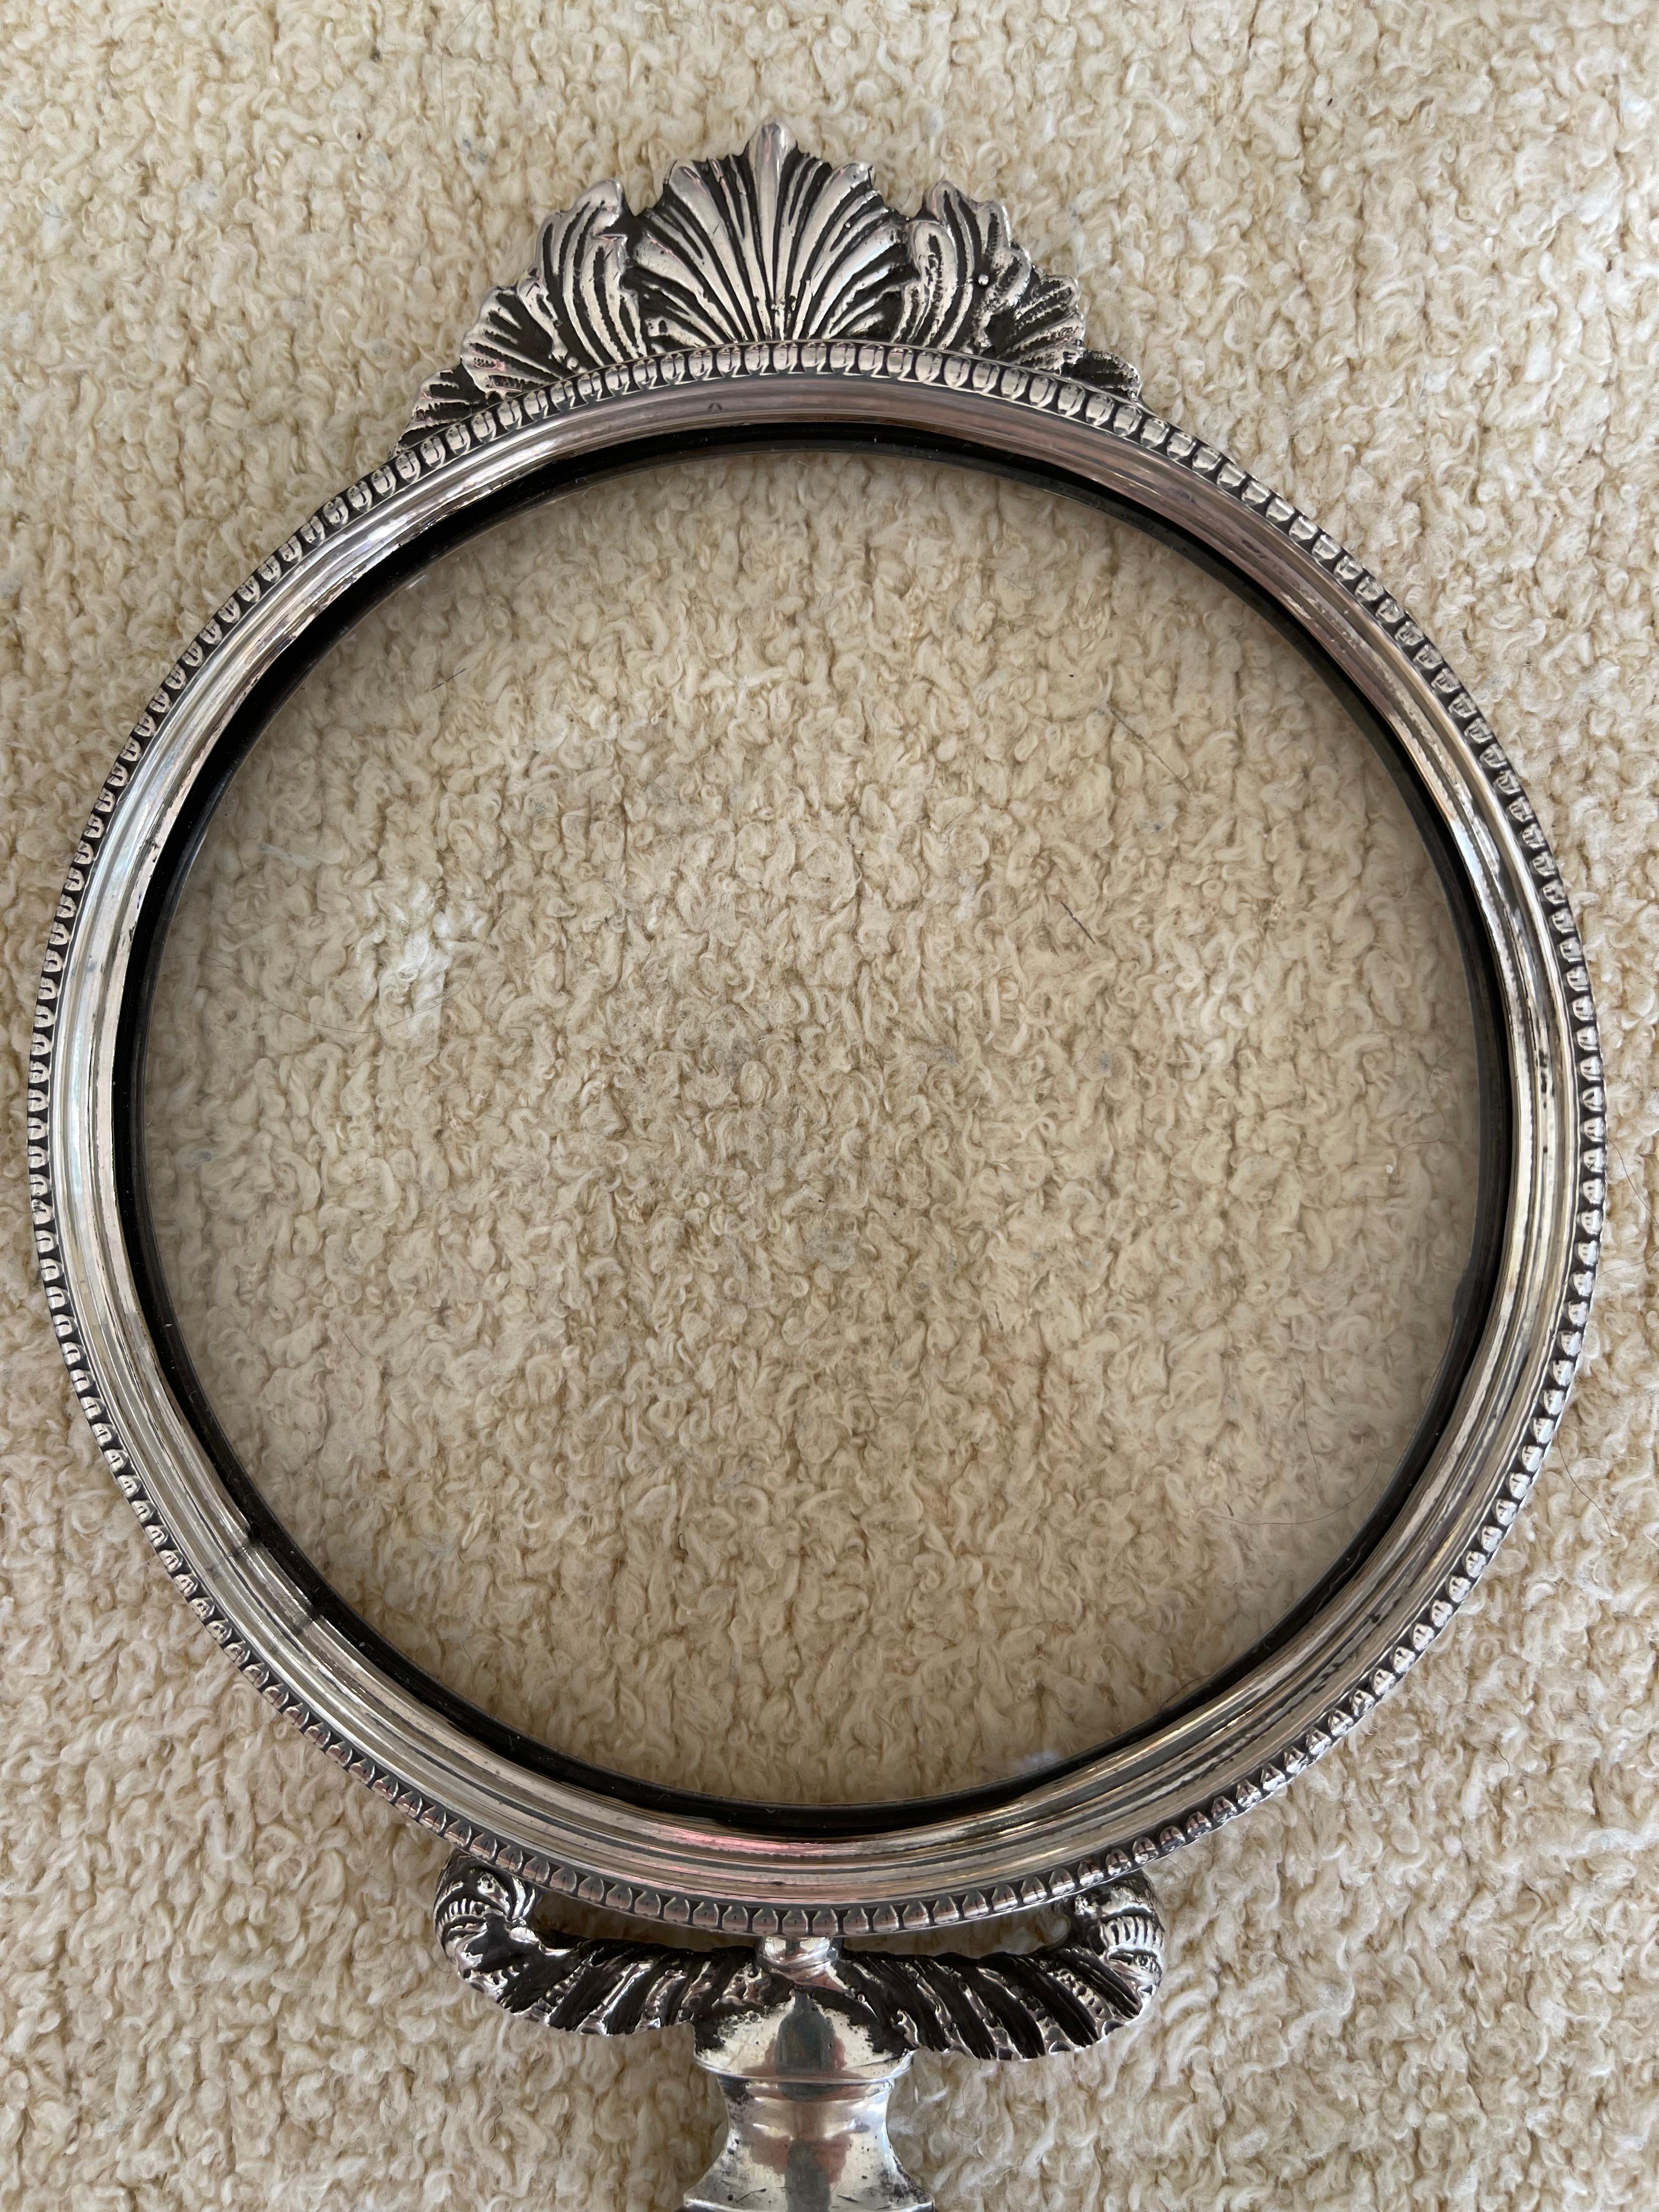  This is magnifying glass is about the highest quality example you can find. Silver plate over bronze and displaying beautiful cast elements. The crest, the handle, and down to the beautifully detailed sides show top quality workmanship. Just to top